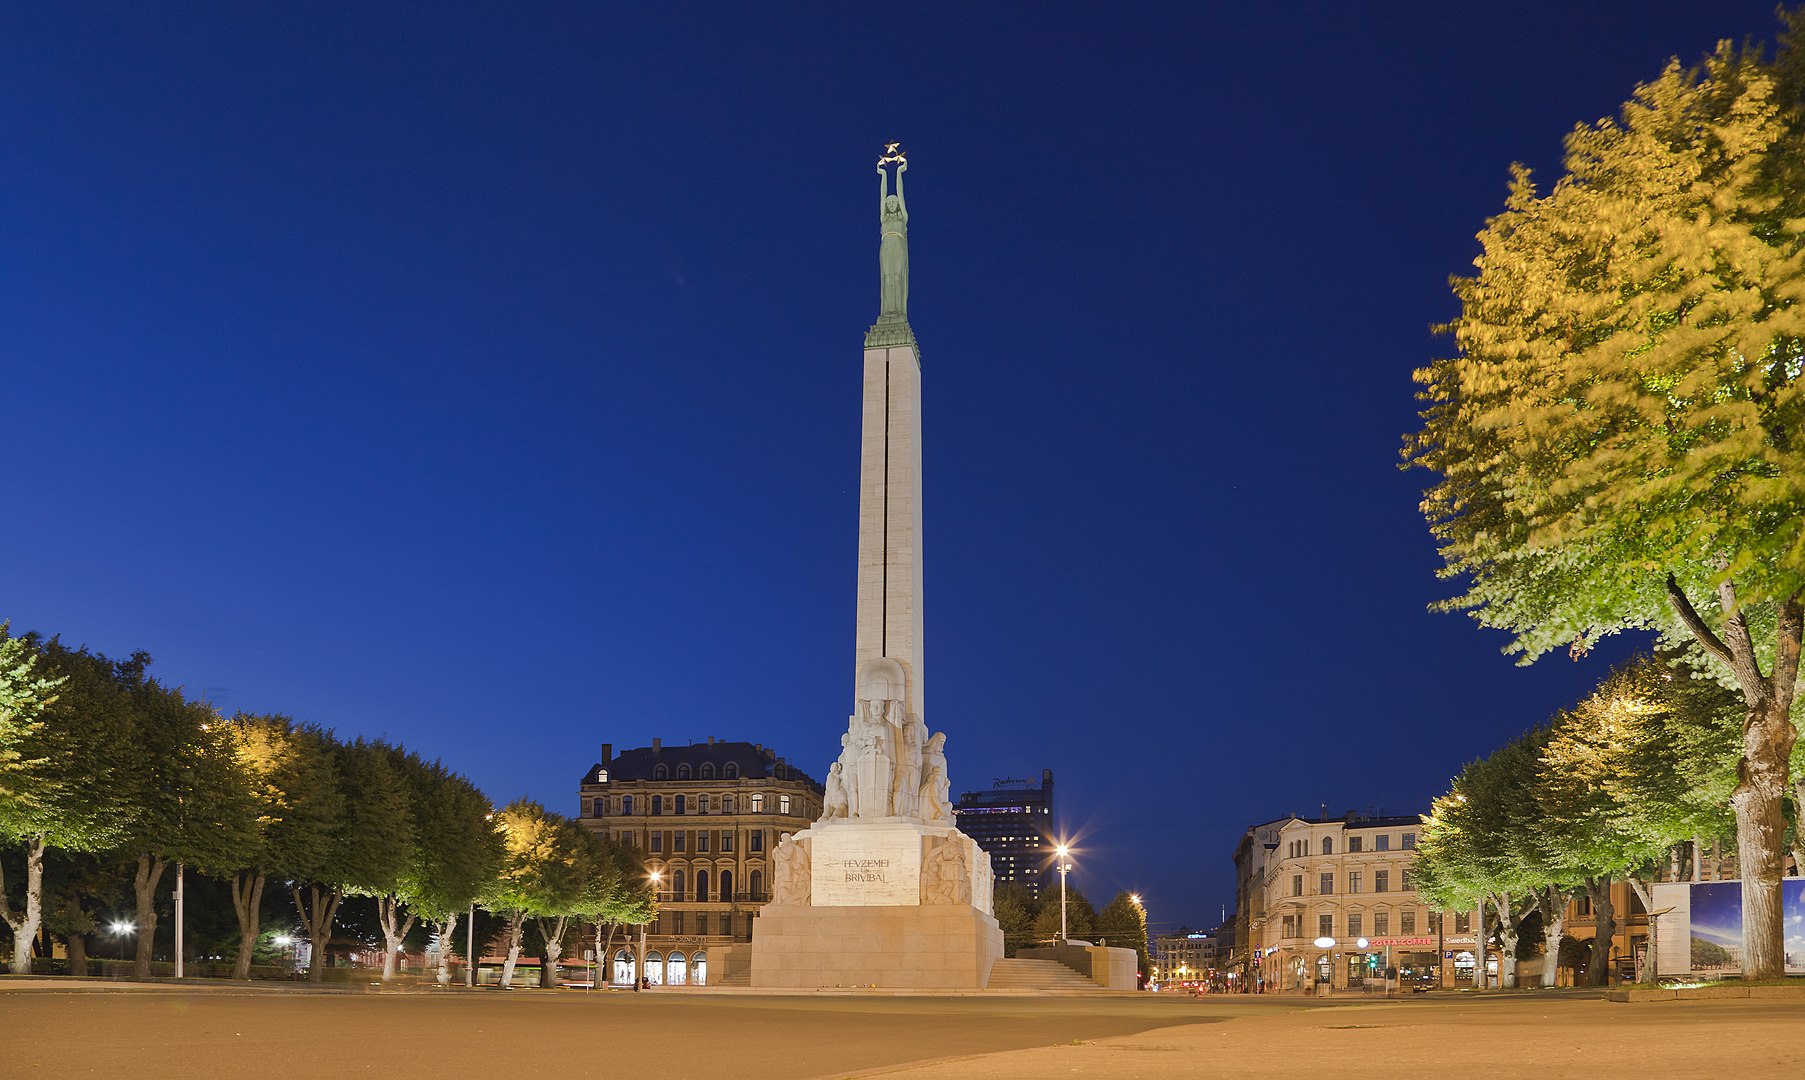  Riga, Freedom Monument, by Diego Delso, CC BY-SA 3.0